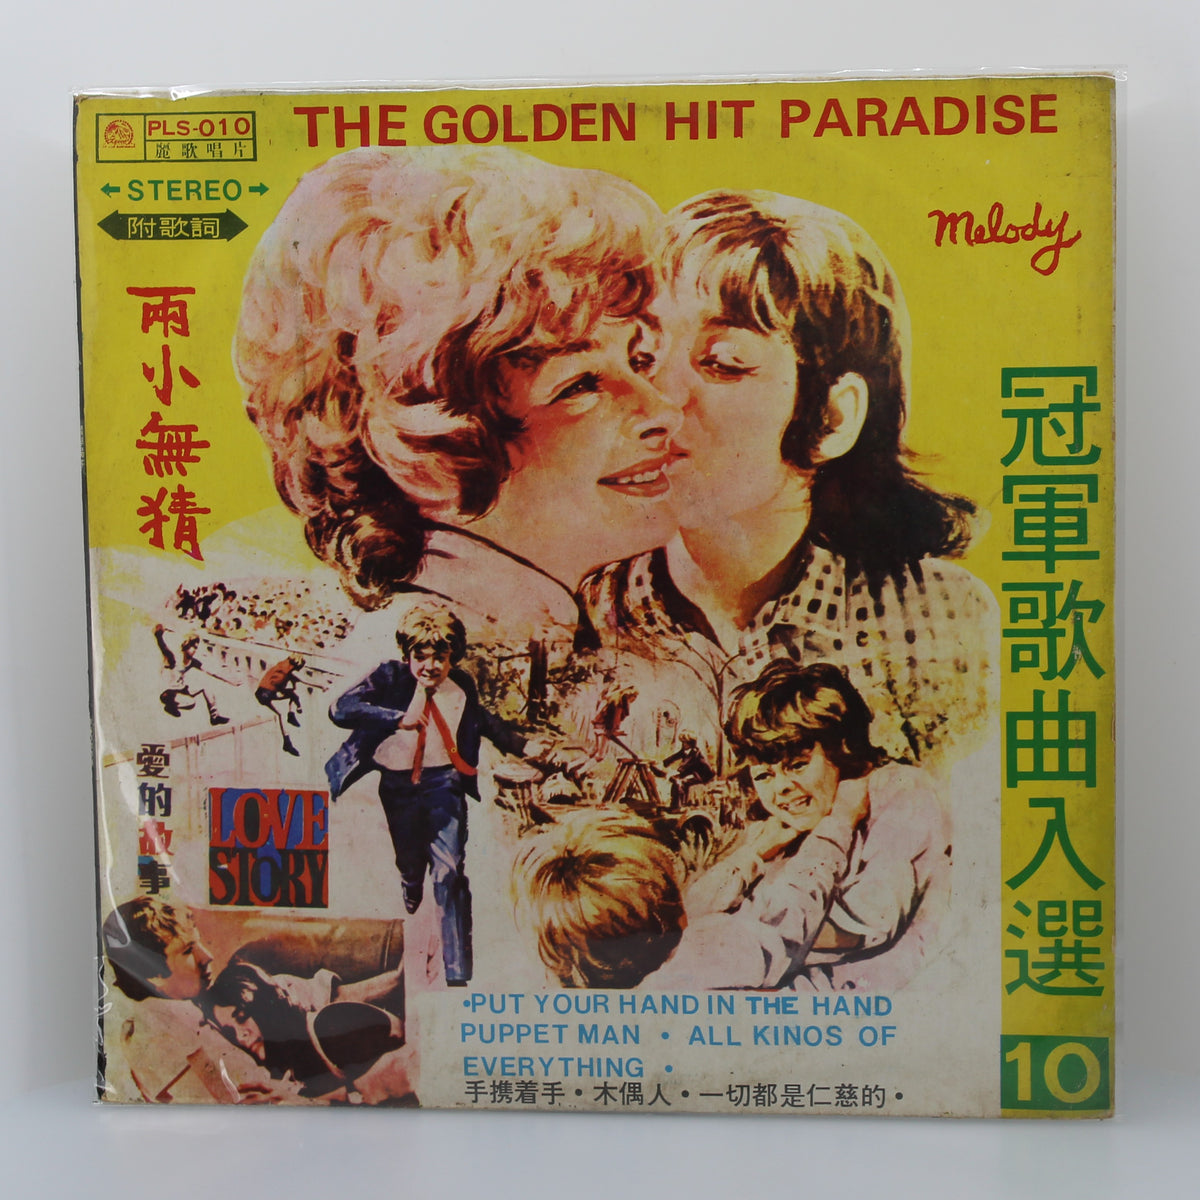 Bee Gees &amp; Various – Original Soundtrack Recording From Melody/Love Story, Vinyl, LP, Album, Unofficial Release, Taiwan 1971